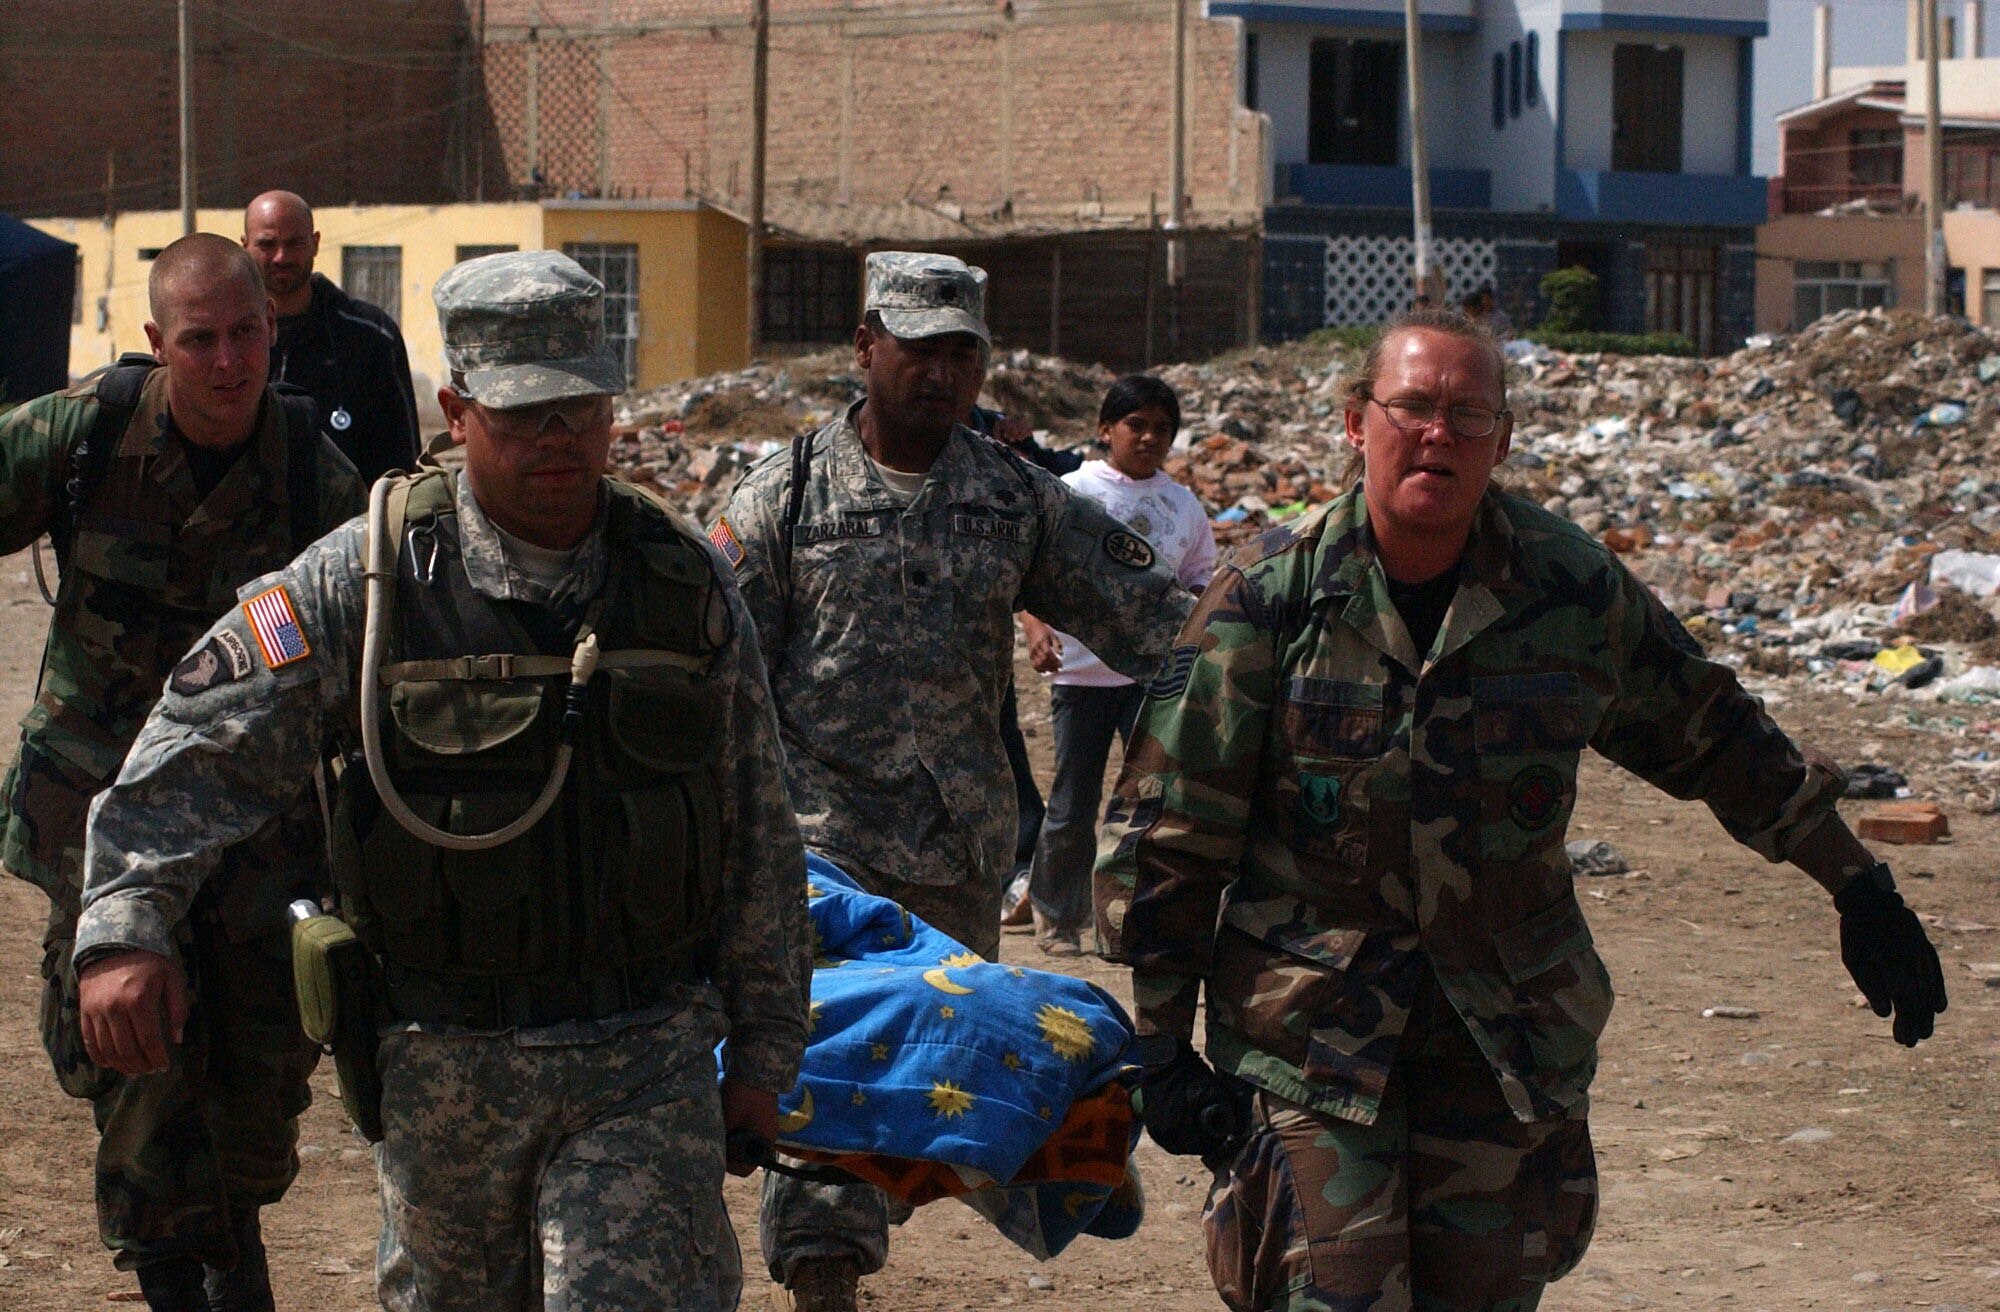 From left, Senior Airman Shaun Emery, Army Specialist Jose Hernandez, Army Lt. Col. Eduardo Zarzabal and Tech. Sgt Mellisa Walker, from the Joint Task Force-Bravo medical humanitarian relief team, carry a woman from her home to the site of the team's medical care site. The task force deployed Aug. 17 to provide medical humanitarian assistance to the citizens of Pisco, Peru following an 8.0 magnitude earthquake Aug. 15. U.S. Army photo by Specialist Grant Vaught.